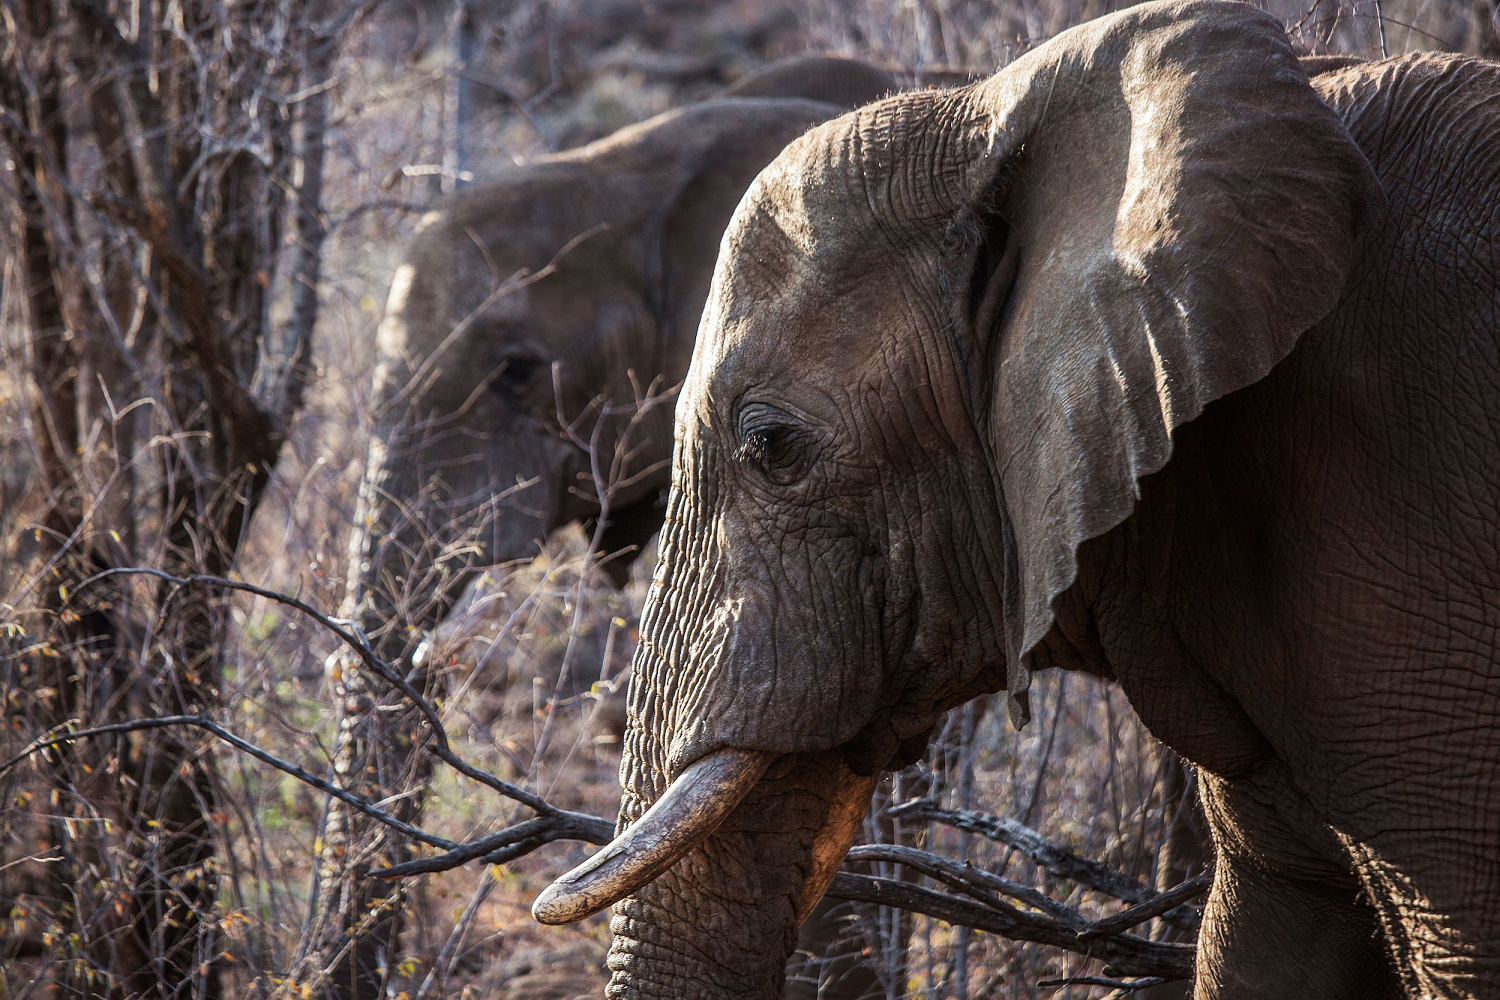 Tourist trampled to death by elephants in South Africa after leaving car to take photos